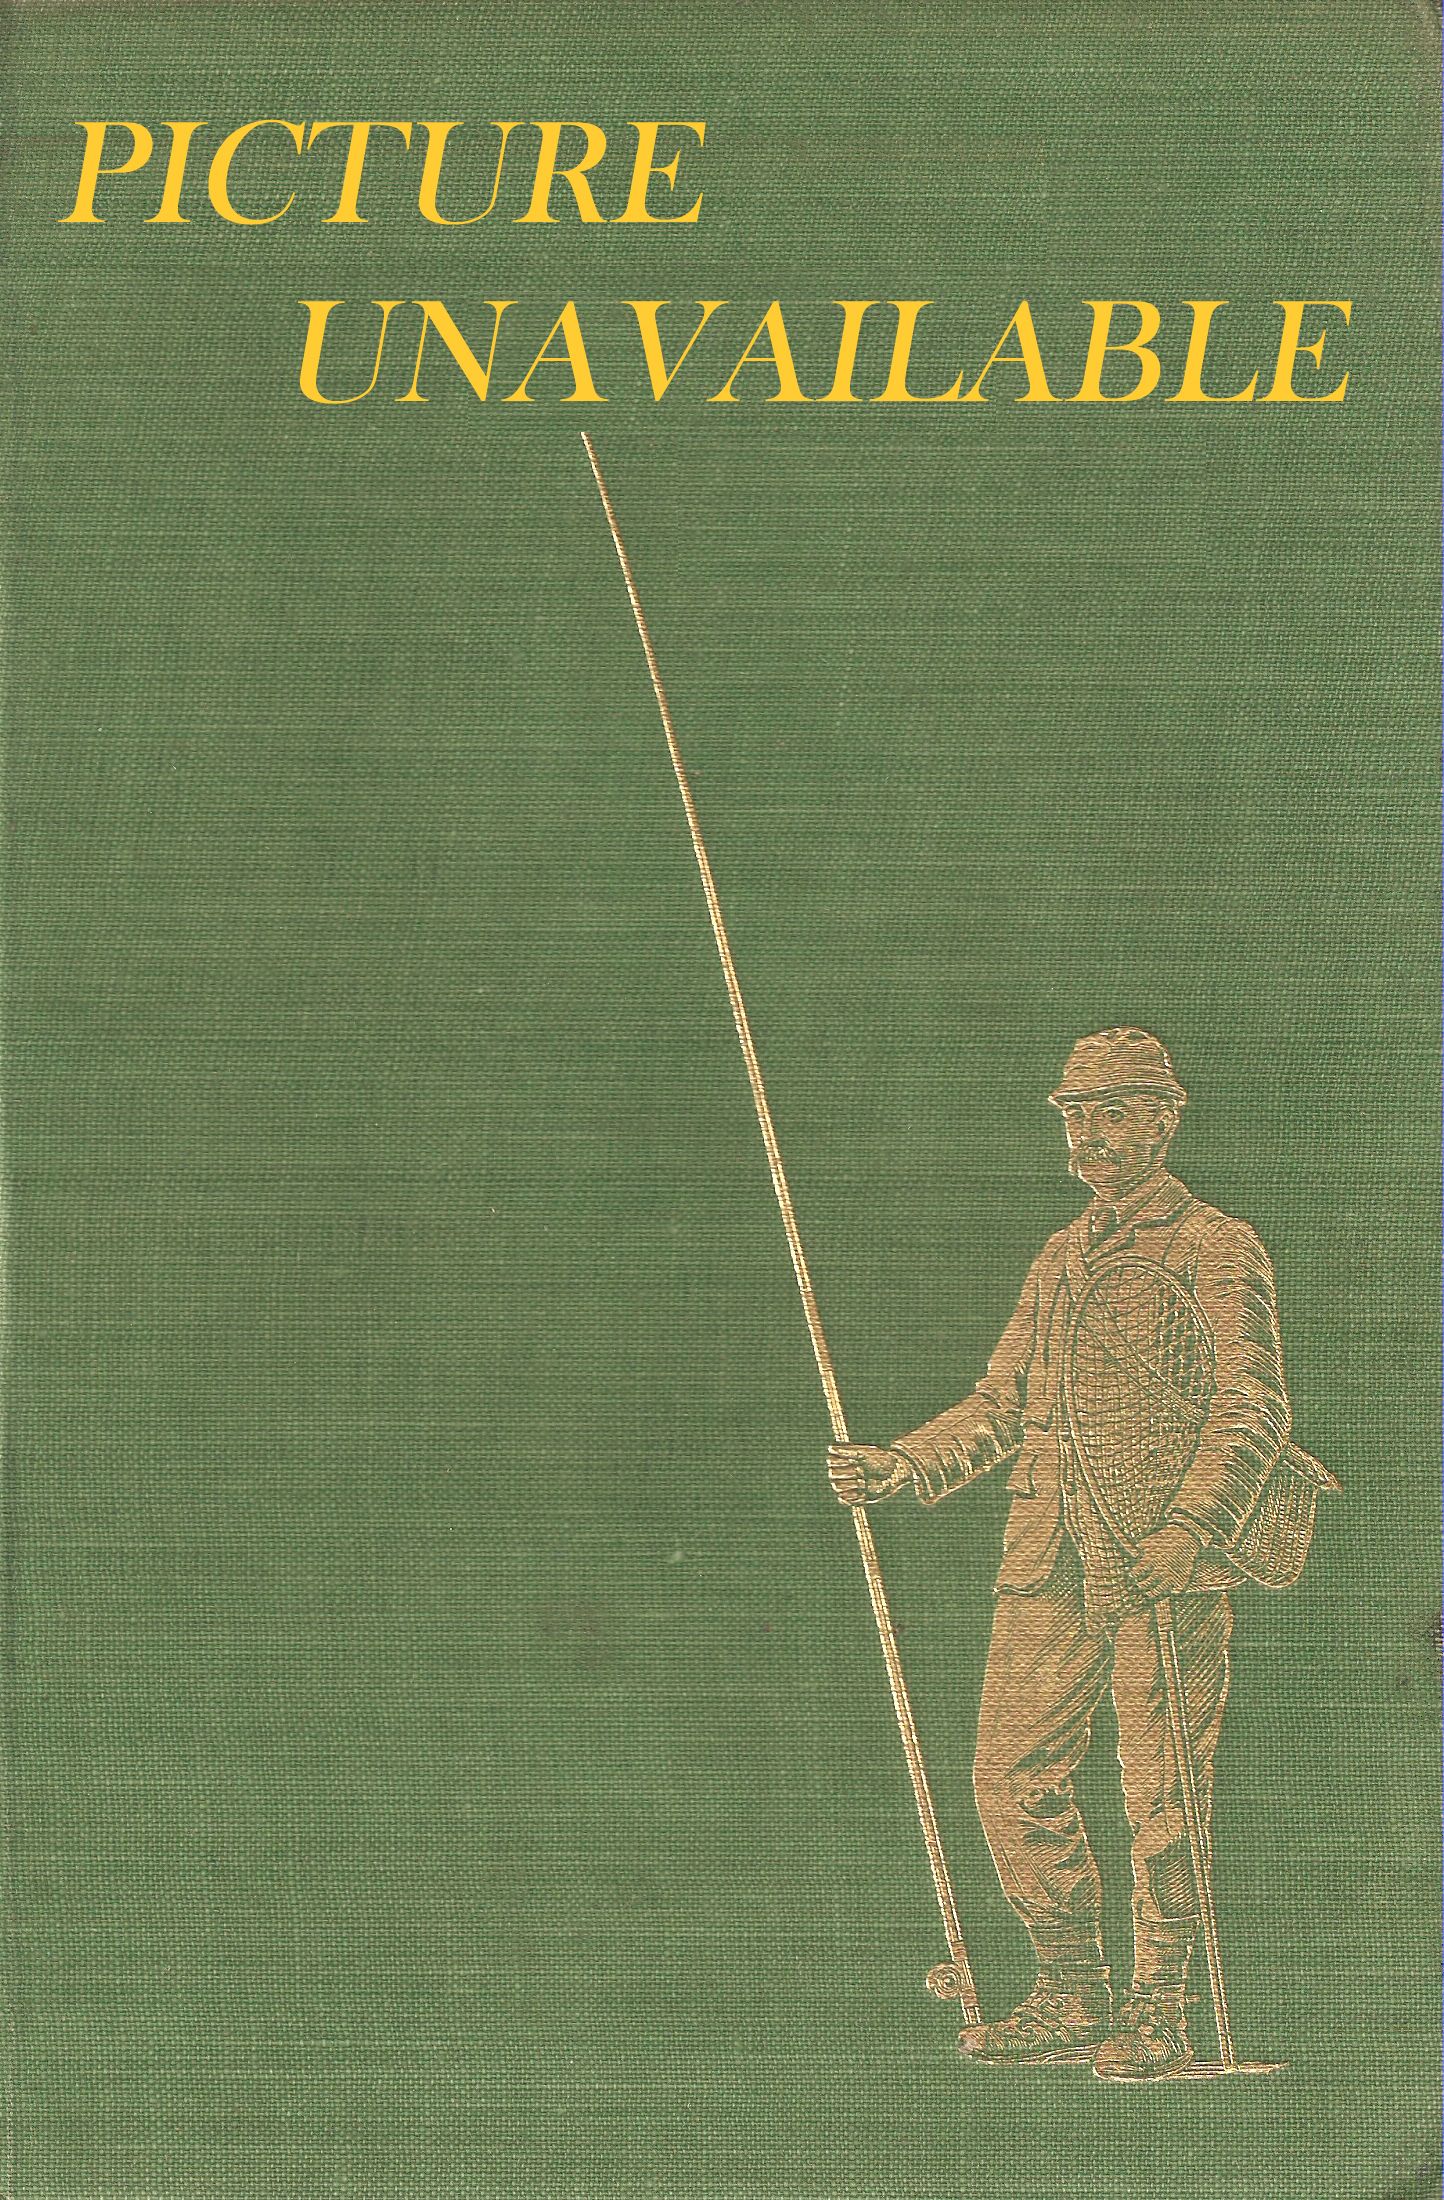 PELHAM MANUAL OF RIVER COARSE FISHING. Revised edition. By Peter Wheat.  Line drawings by Baz East.